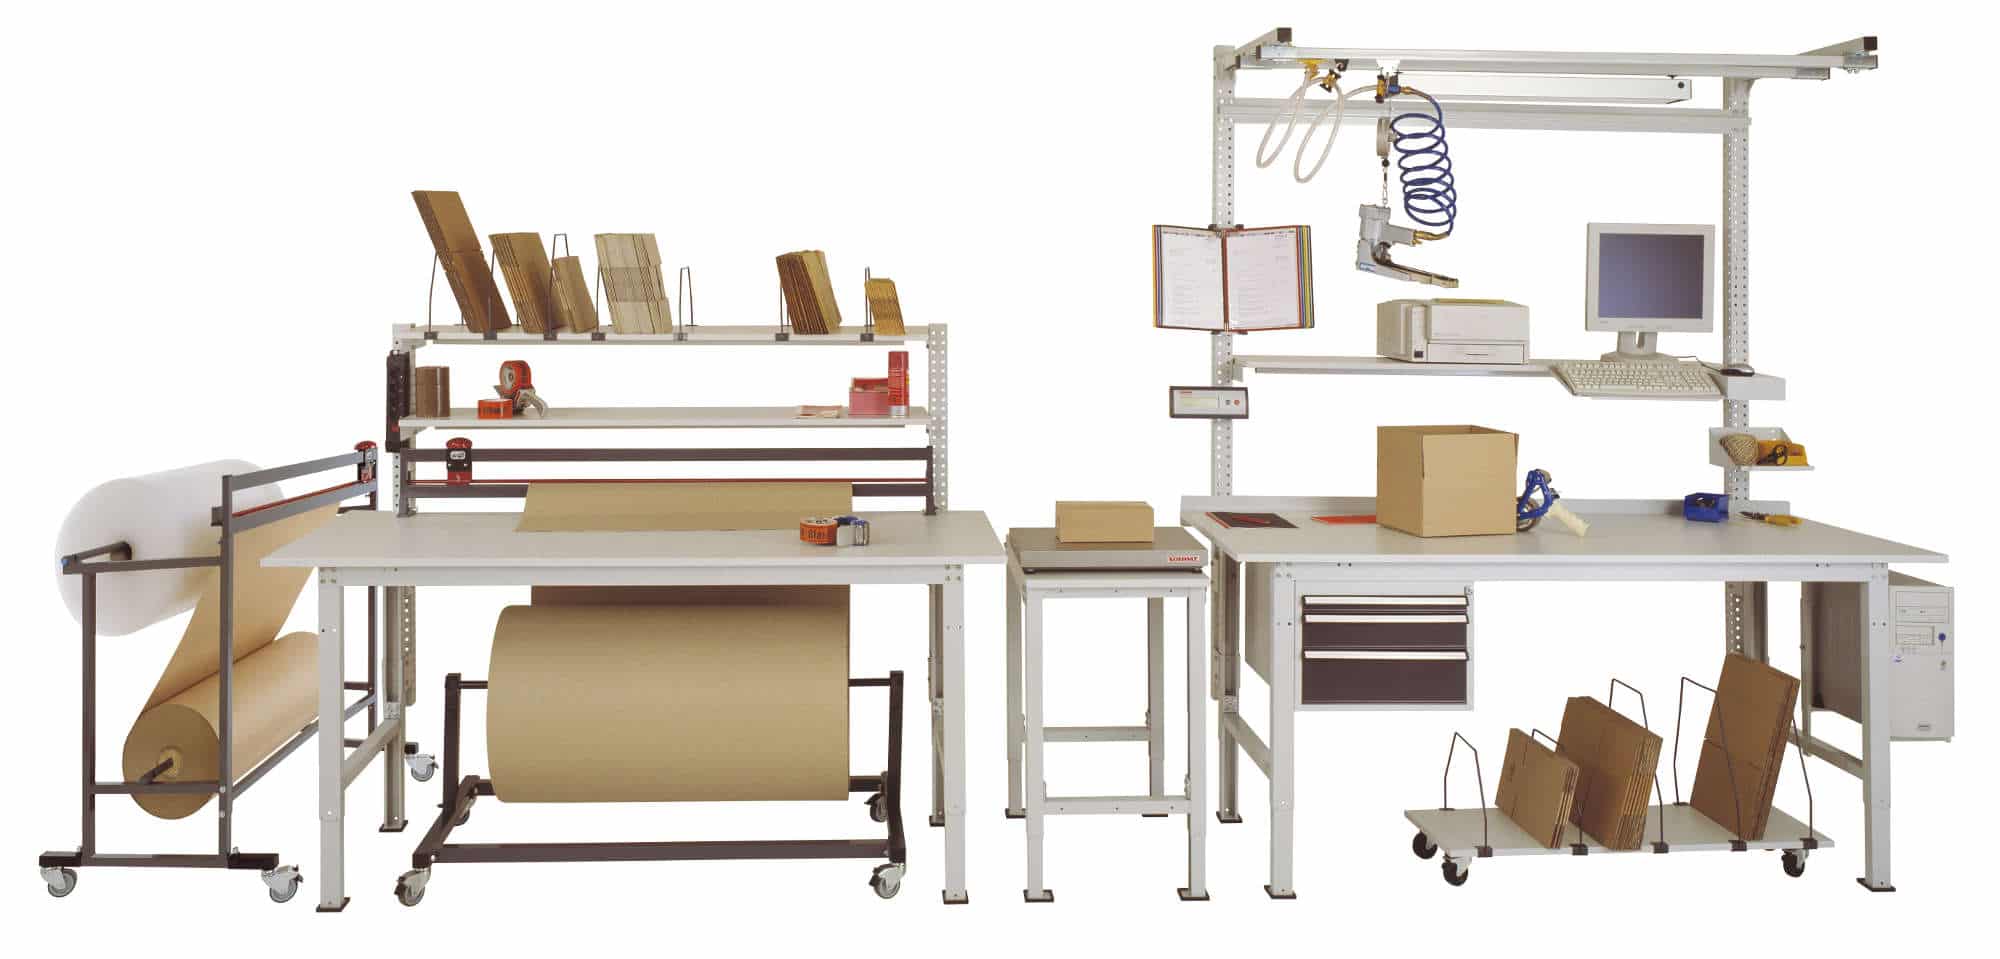 Packtisch - Packing table systems